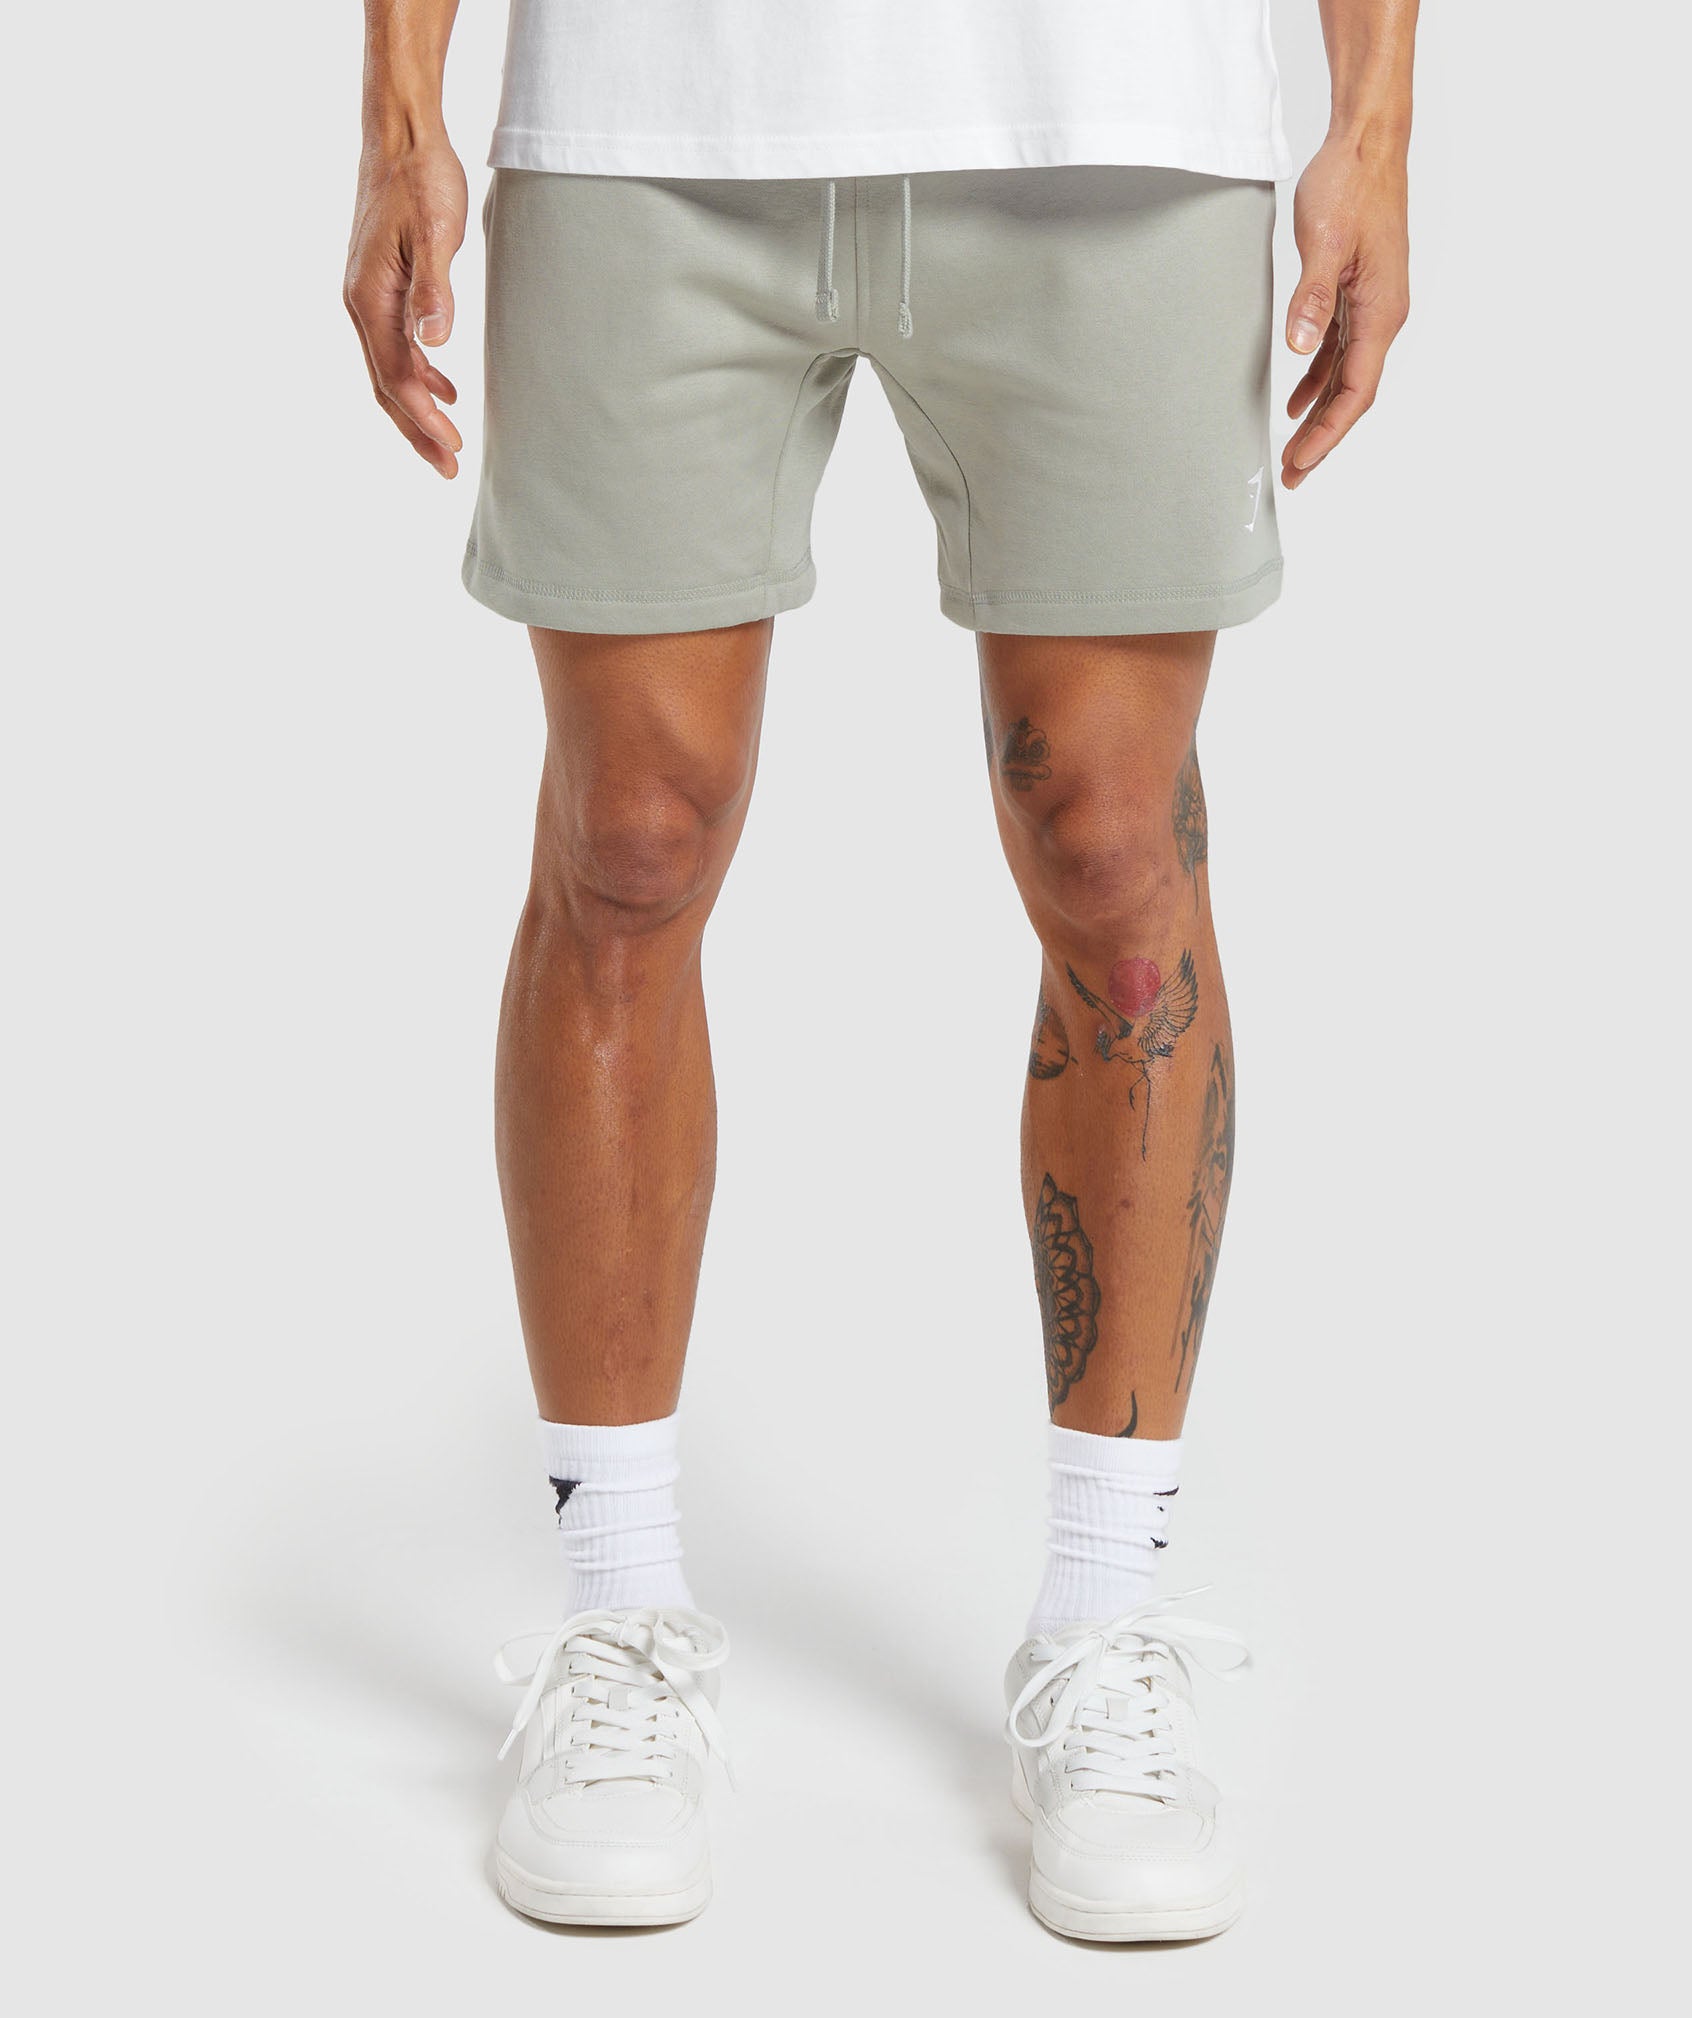 Crest Shorts in Stone Grey